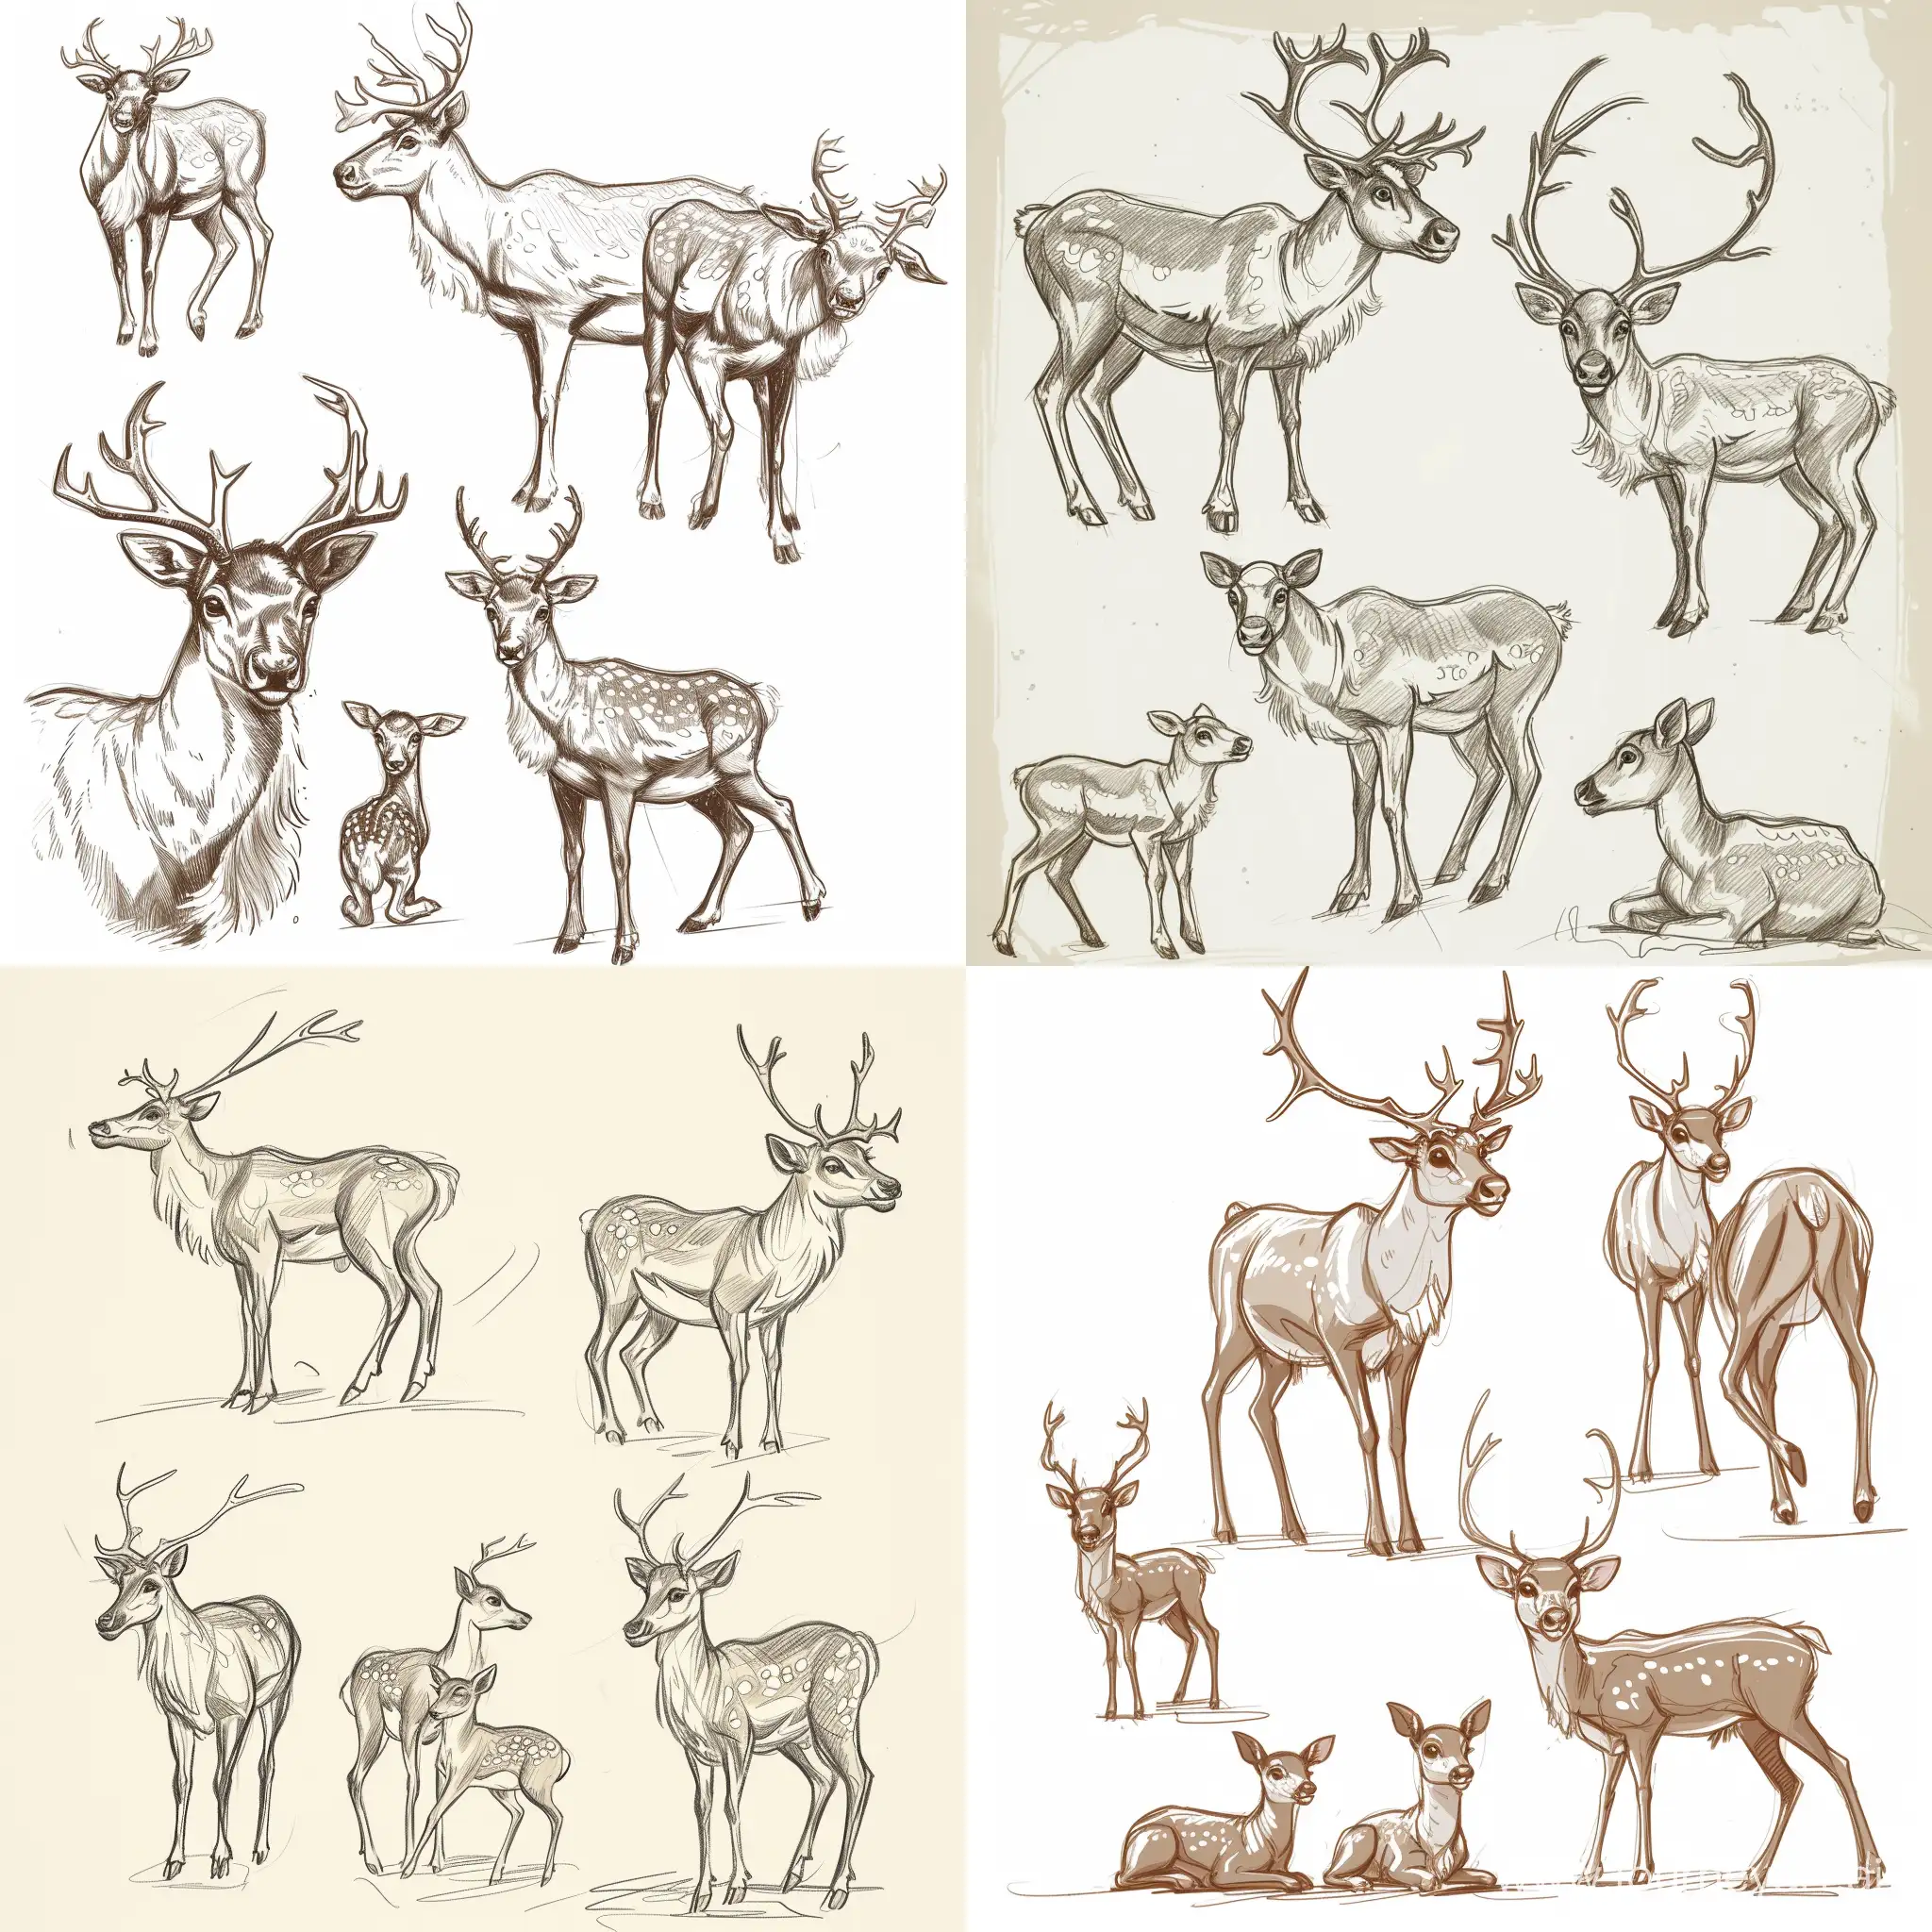 Playful-Reindeer-Family-Sketch-Five-Adults-and-Two-Adorable-Fawns-in-Various-Poses